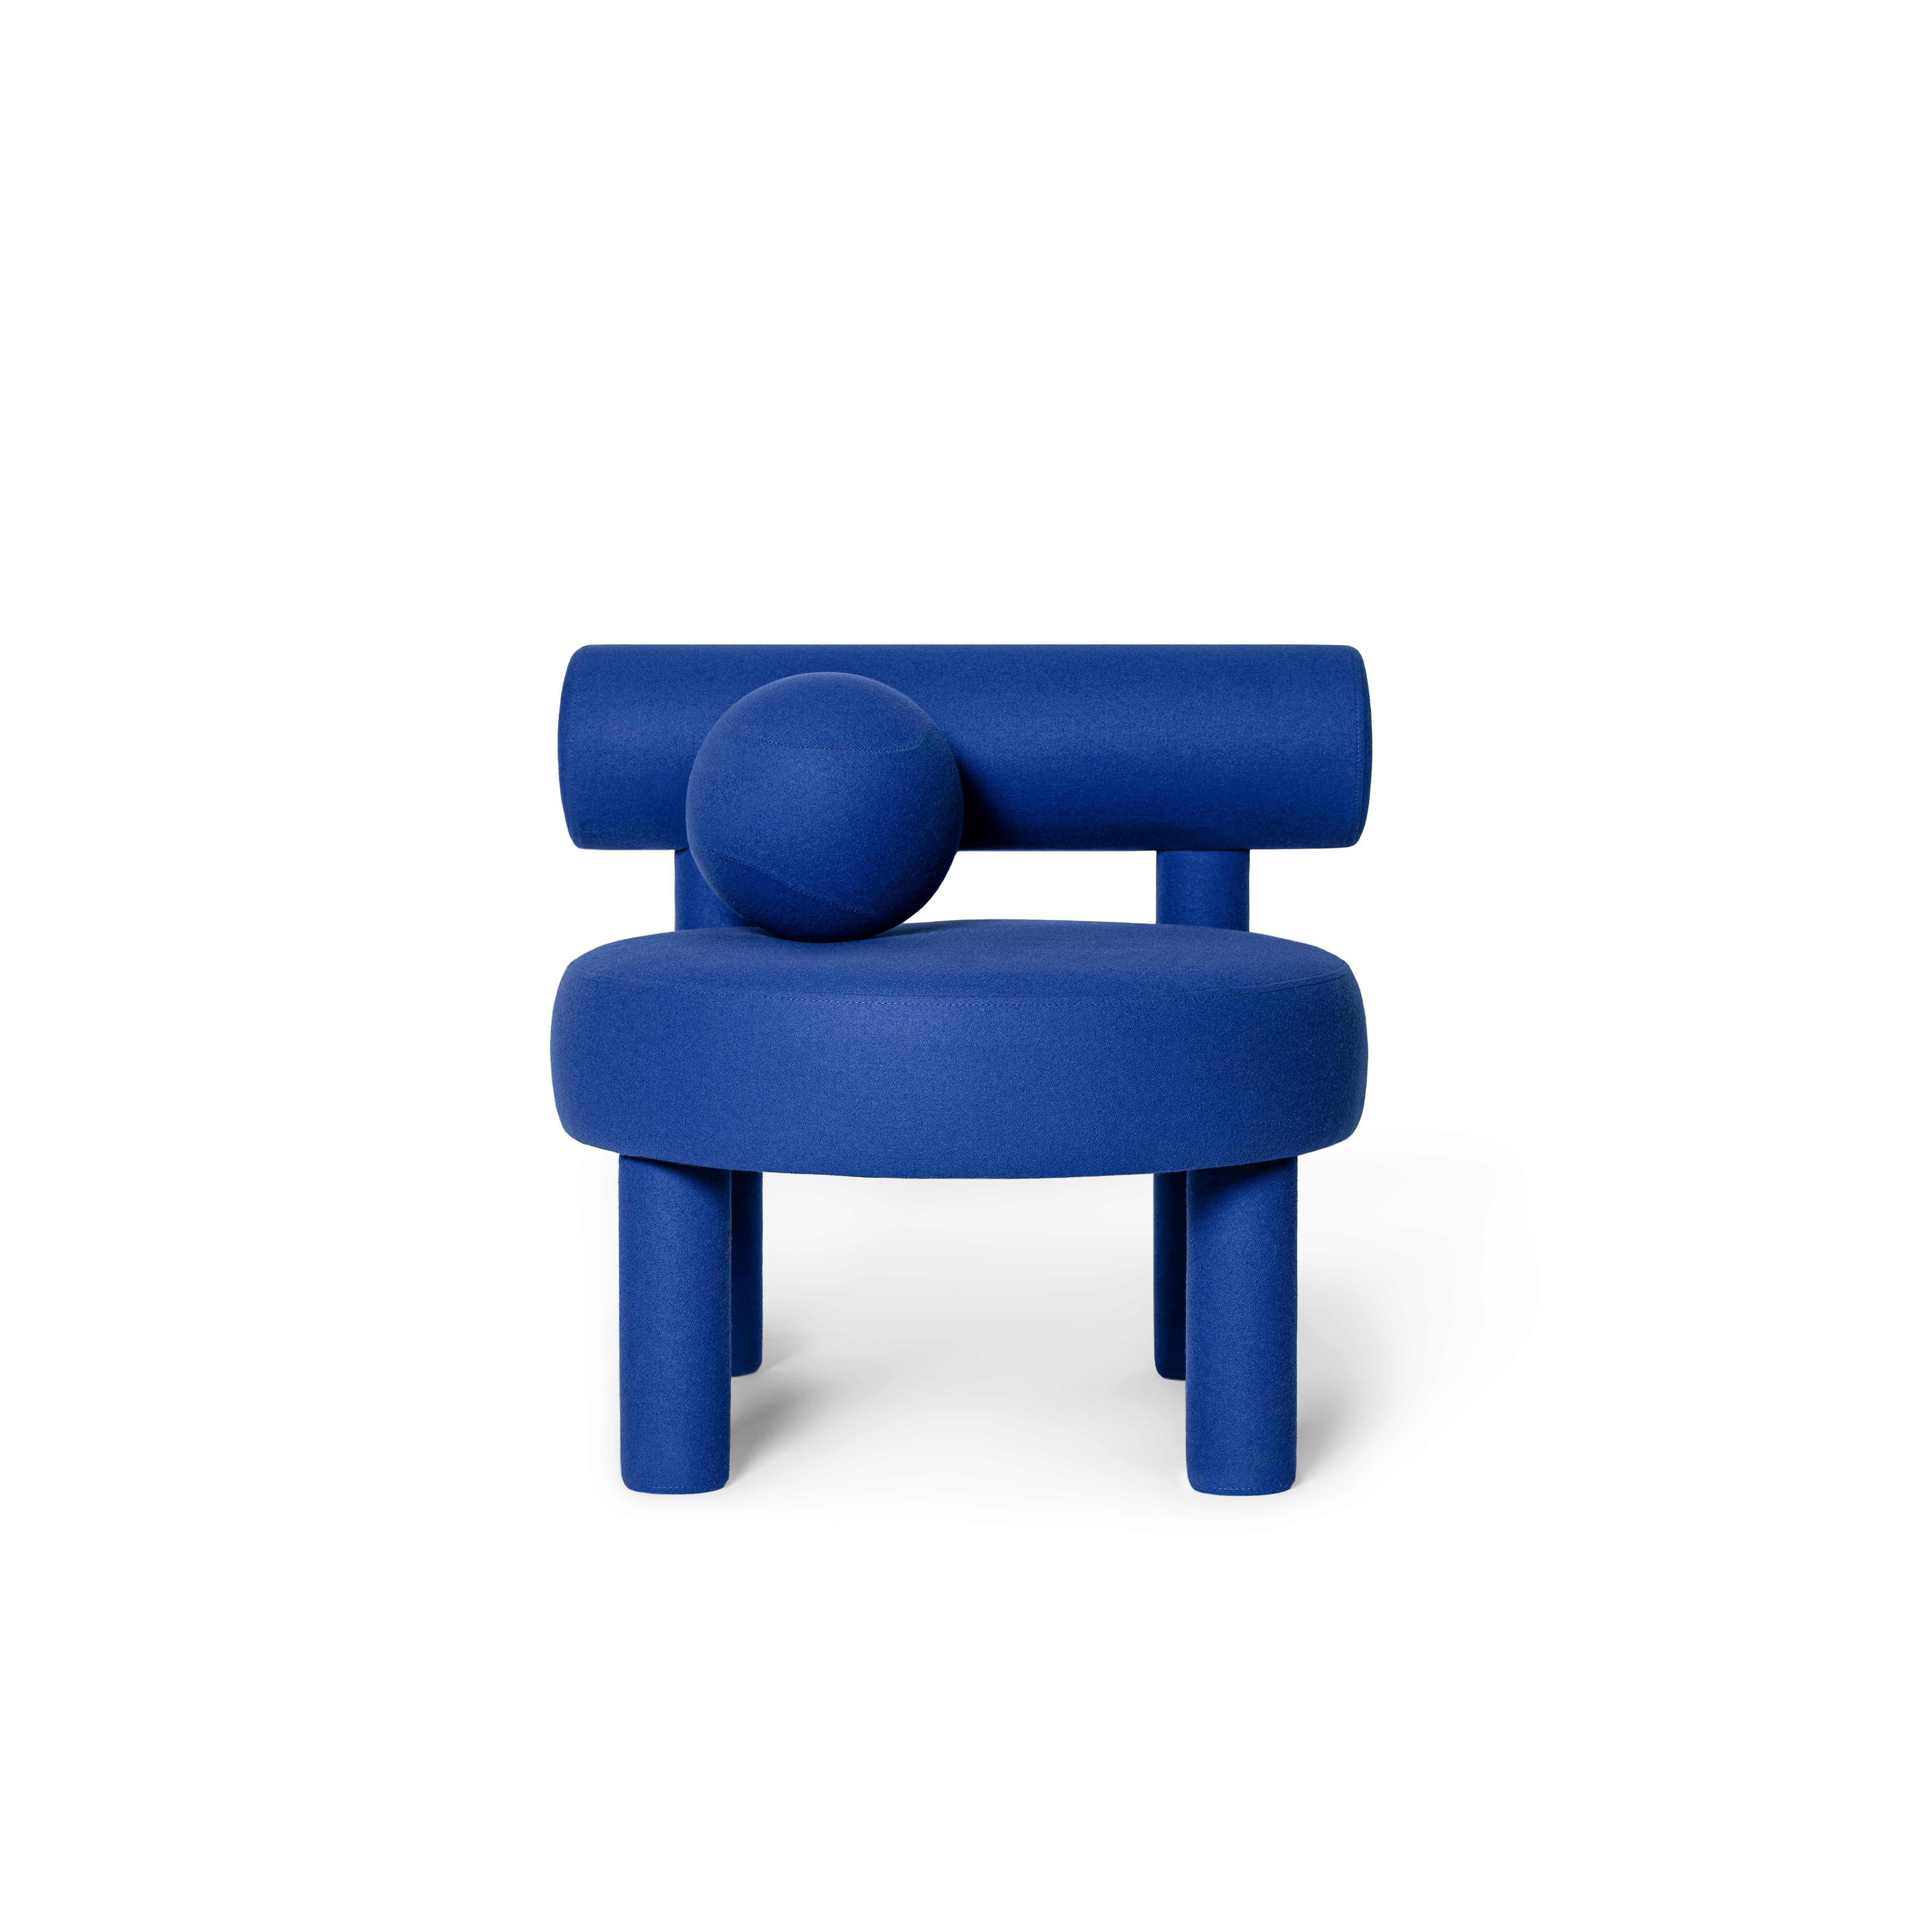 Organic Modern Contemporary Low Chair 'Gropius CS1' by NOOM, Blue For Sale